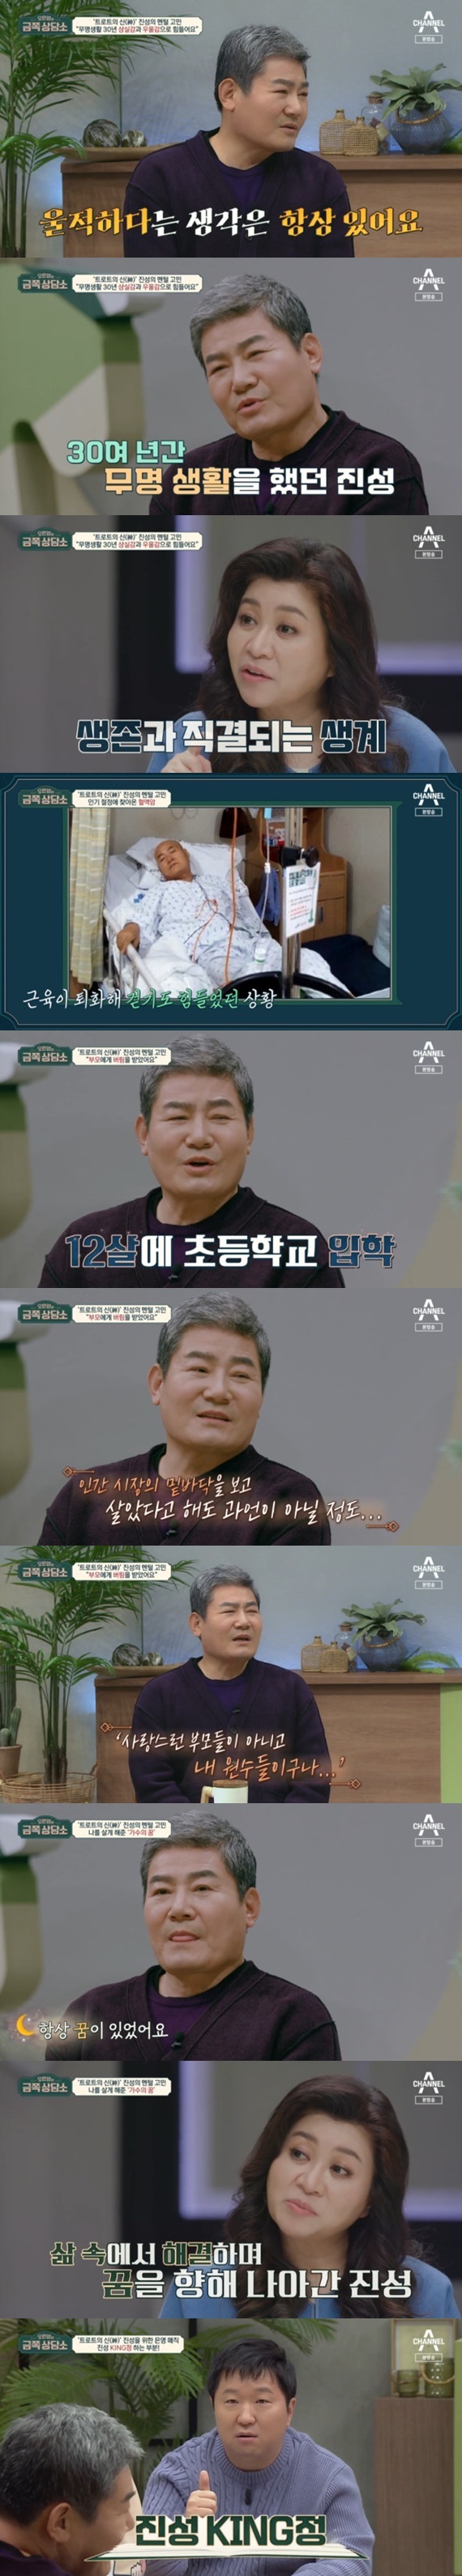 Seoul) = Actor Jin Sung confessions chronic Melencolia I feeling and a grueling childhood.Trot singer Jin Sung told her troubles at the channel A entertainment program Oh Eun Youngs Gold Counseling Center (Gold Counseling Center), which was broadcast at 9:30 pm on the 18th.My song is awkward even if its not for three days, Jin Sung said, Confessions saying that he feels anxious and nervous about the performance, which has been reduced by the aftermath of the new coronavirus infection (Corona 19).I was saddened by the stage that disappeared when I was loved after 30 years of unknown life.Oh Eun Young said that the long-term Corona 19 is hurting the self-employed who are threatened by the livelihood directly linked to Earth 2, and added, It makes life and Earth 2 helpless because they can not decide.Jin Sung, who said, There is always a feeling of depression, was said to have a chronic Melencolia I feeling.In his mid-fifties, he died of lymphoma blood cancer and heart valve disease.Jin Sung said, I feel uneasy, I feel comfortable when I perform, but when I get a stage schedule, I feel uneasy for a week.Jin Sung was shocked by the Confessions of his childhood when he was three years old and had a hard time starving his parents who had left his house.I met my parents eight years after I broke up with them and I entered elementary school at the age of 12, but I was abandoned once again, and I grew up at the bottom of the human market.Jin Sung said he thought his parents were enemies and vowed not to find them.However, he told the story of his mother who is now 90 years old and said, Thank you for just letting me be born, I am going to eat a good heart because I conceived me today.Jin Sung said that it was because of the dream of being a singer that he was able to endure his hard life due to hunger and abuse.Jin Sung said, Life is a long time, but when you look down, it is a life that is as fast as an arrowhead.Oh Eun Young said, Melencolia I and anxiety are the life of Jin Sung itself, the life of Jin Sung who has lived hard, is worthy and respectable. Jin Sung said King Jung, Eunyoung Magic.On the other hand, Channel A Oh Eun Youngs Gold Counseling Center is from 0 to 100 years old!It is a national mental care program of Oh Eun Young, a national mentor (leader) who solves various troubles together, and broadcasts every Friday at 9:30 pm.